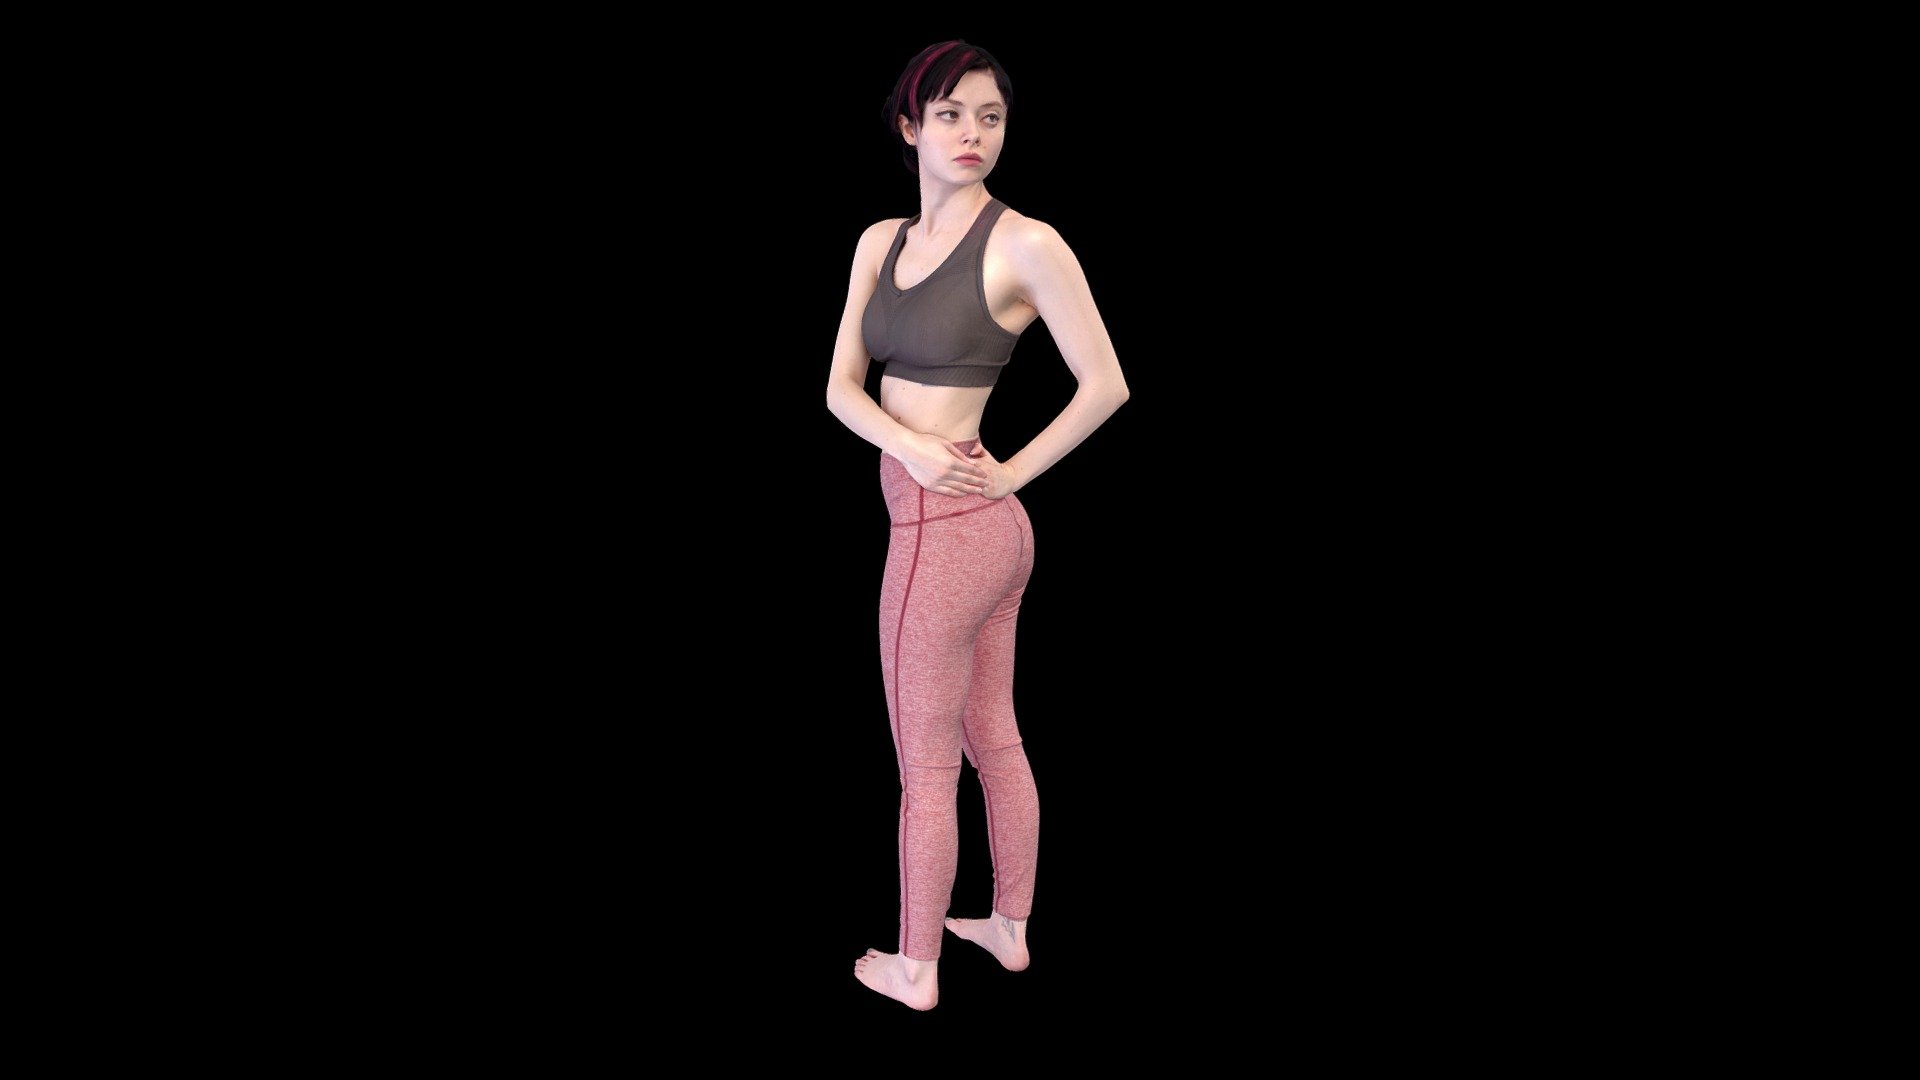 Amy in a torso twist exercise pose wearing yoga outfit.

Product Features:




Game Engine and PBR ready

High Poly

Textures:

All maps are in PNG format.




Diffuse Map (8192x8192)

Specular Map (8192x8192)

Roughness Map (8192x8192)

Normal Map (8192x8192)

SSS Map (8192x8192)

Model Polycounts:




160004 Faces

80000 Vertices

Available File Formats:




OBJ

FBX

About Human Engine:

Using our 150 DSLR Photogrammetry rig, we create 3D and 4D assets for Games, VFX, Movies, Television, Virtual Reality and Augmented Reality. From 3D scanning to rigging, game-engine integration, we have your character creation needs covered 3d model